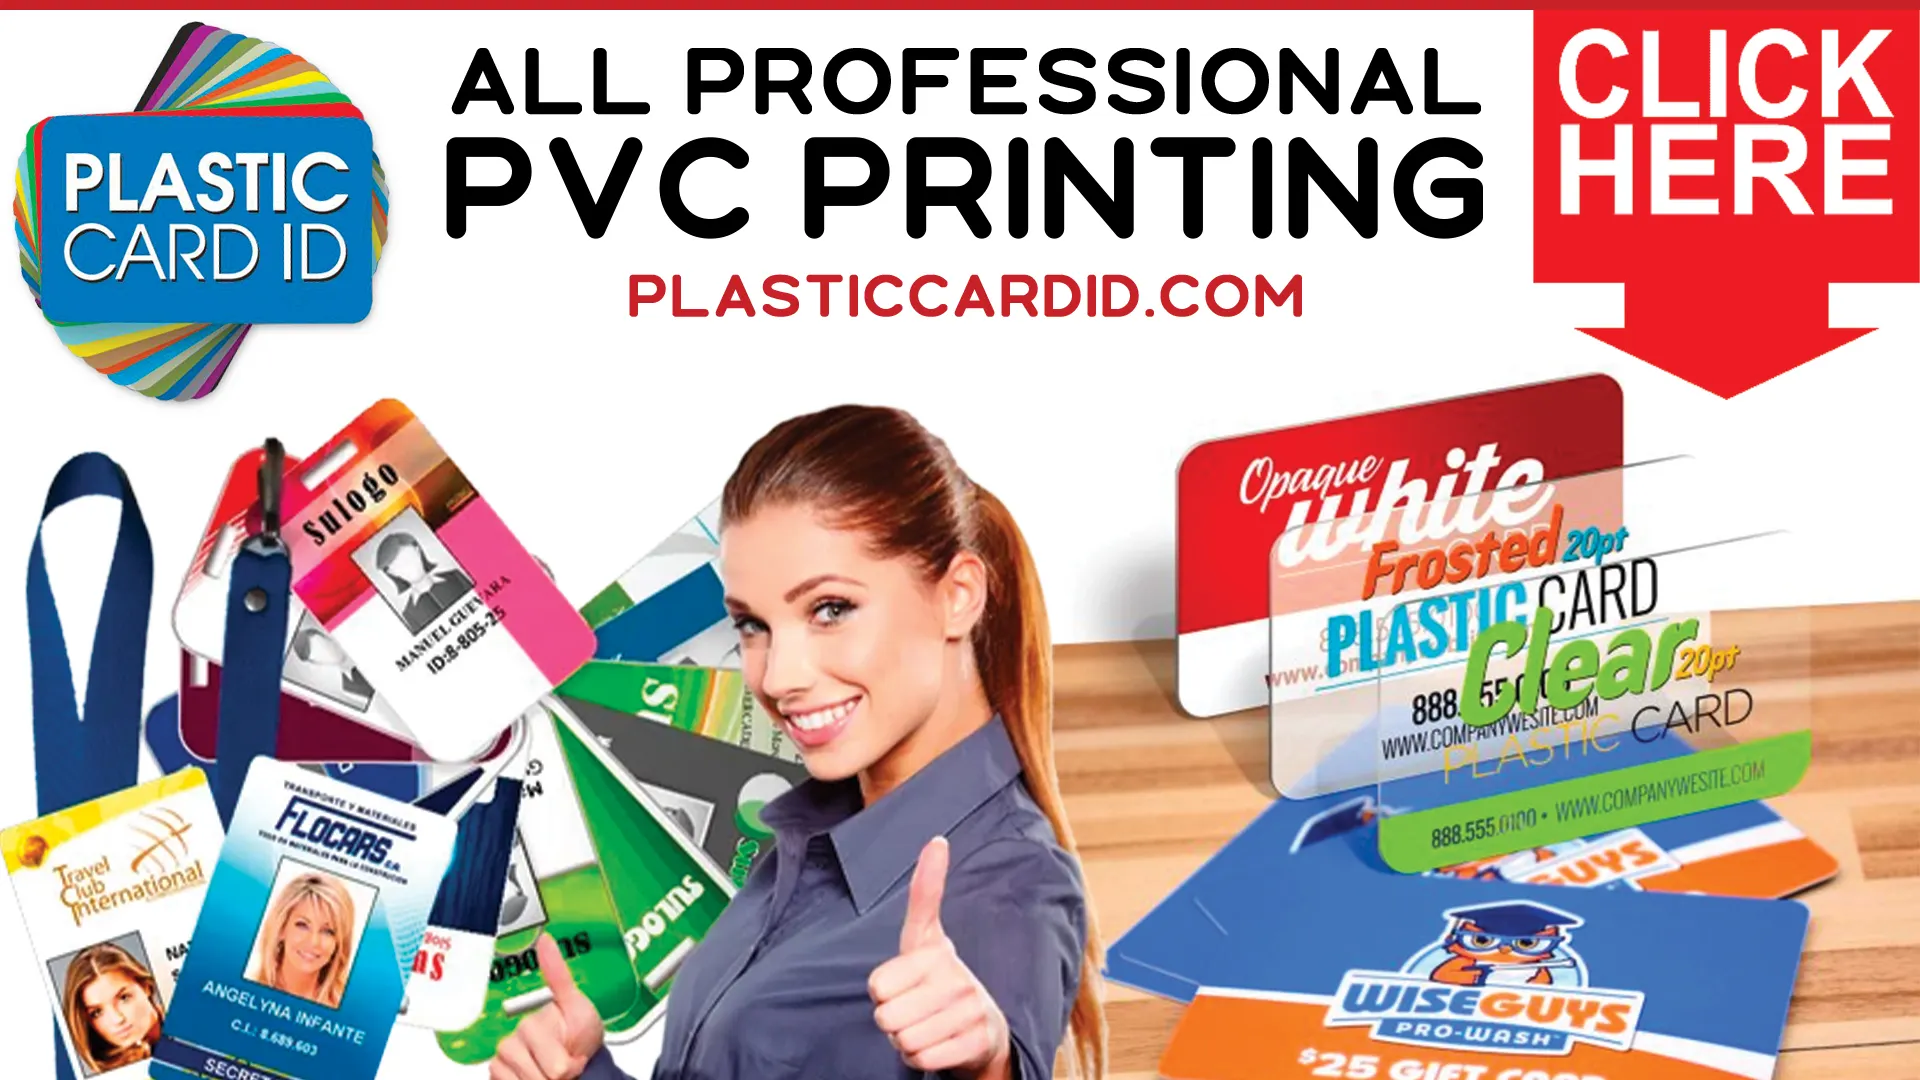 Transform Your Business with Our Plastic Cards